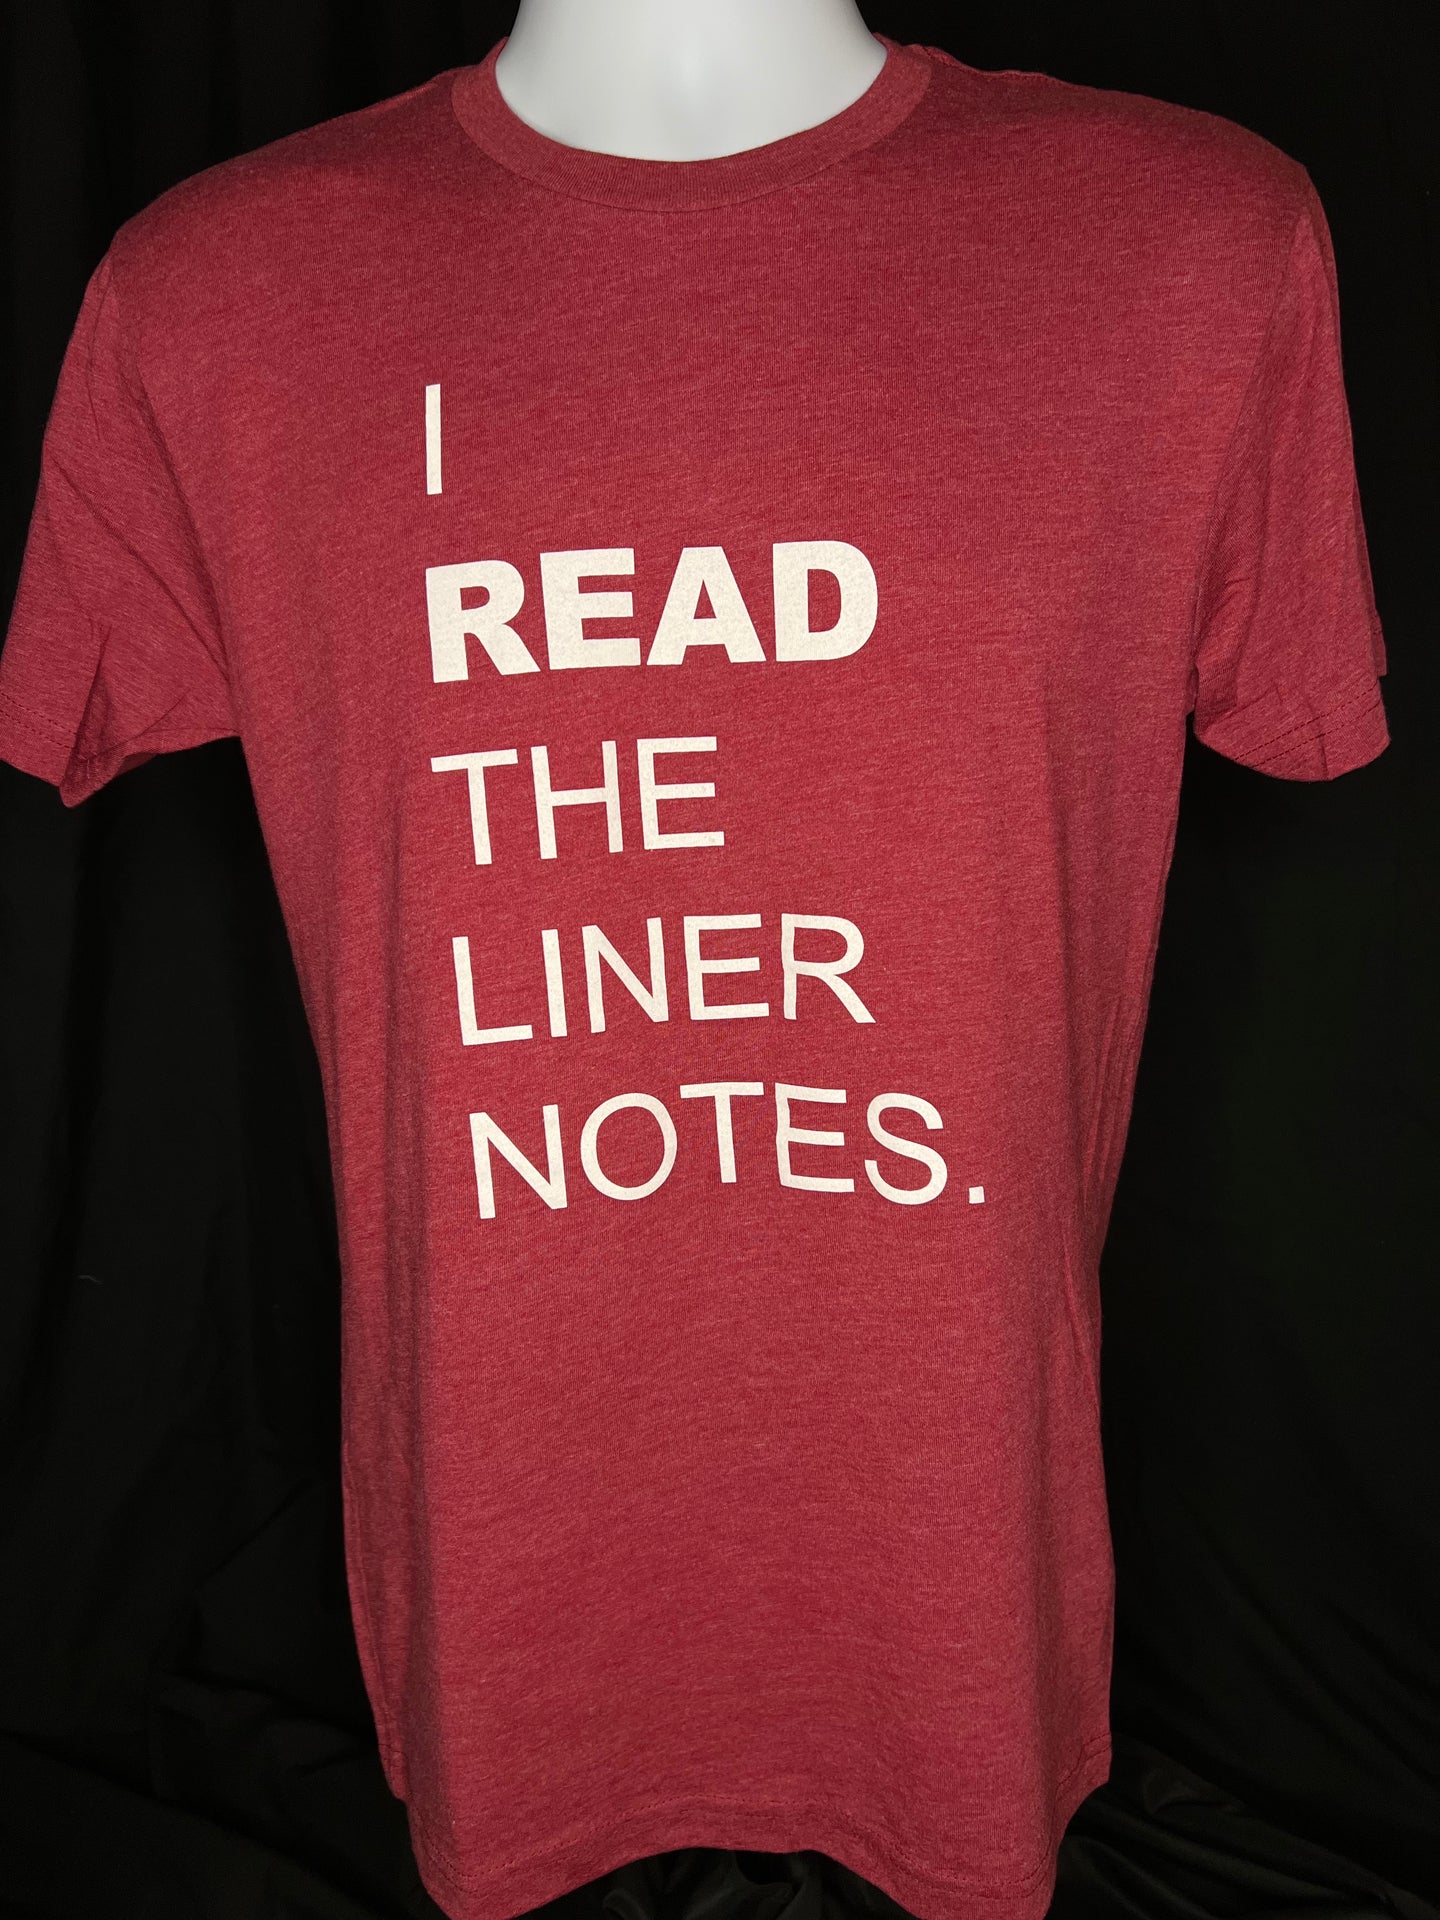 I Read The Liner Notes.® - Cardinal Red T-Shirt (Unisex)